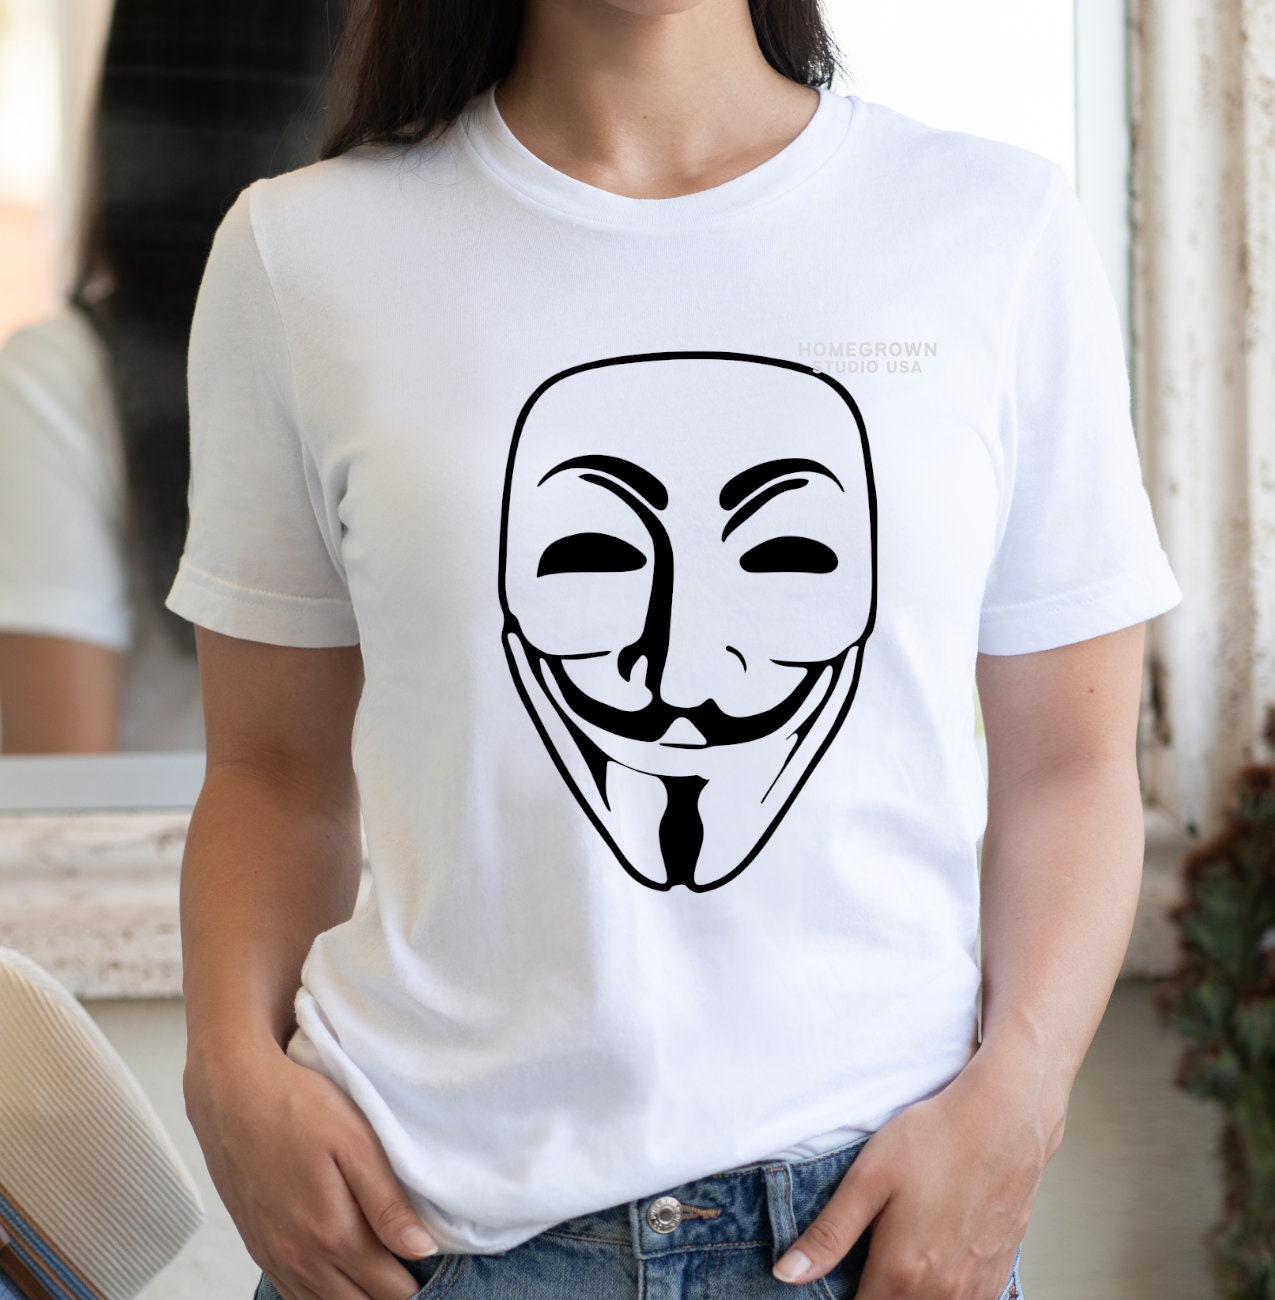 Guy Fawkes Mask Royalty Free Stock SVG Vector and Clip Art